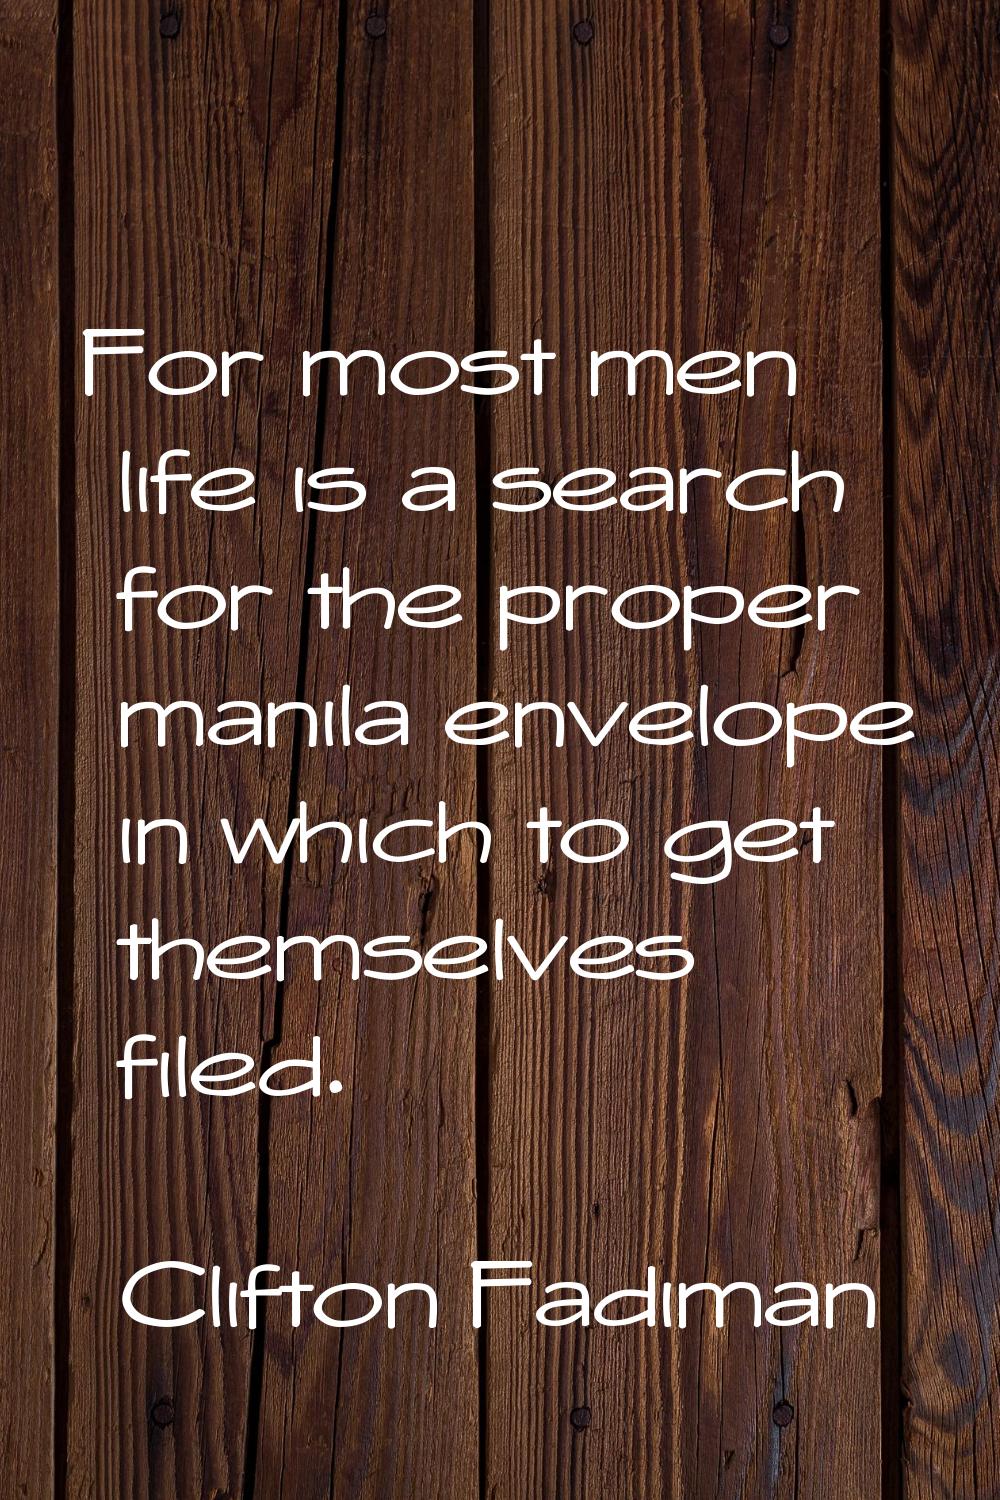 For most men life is a search for the proper manila envelope in which to get themselves filed.